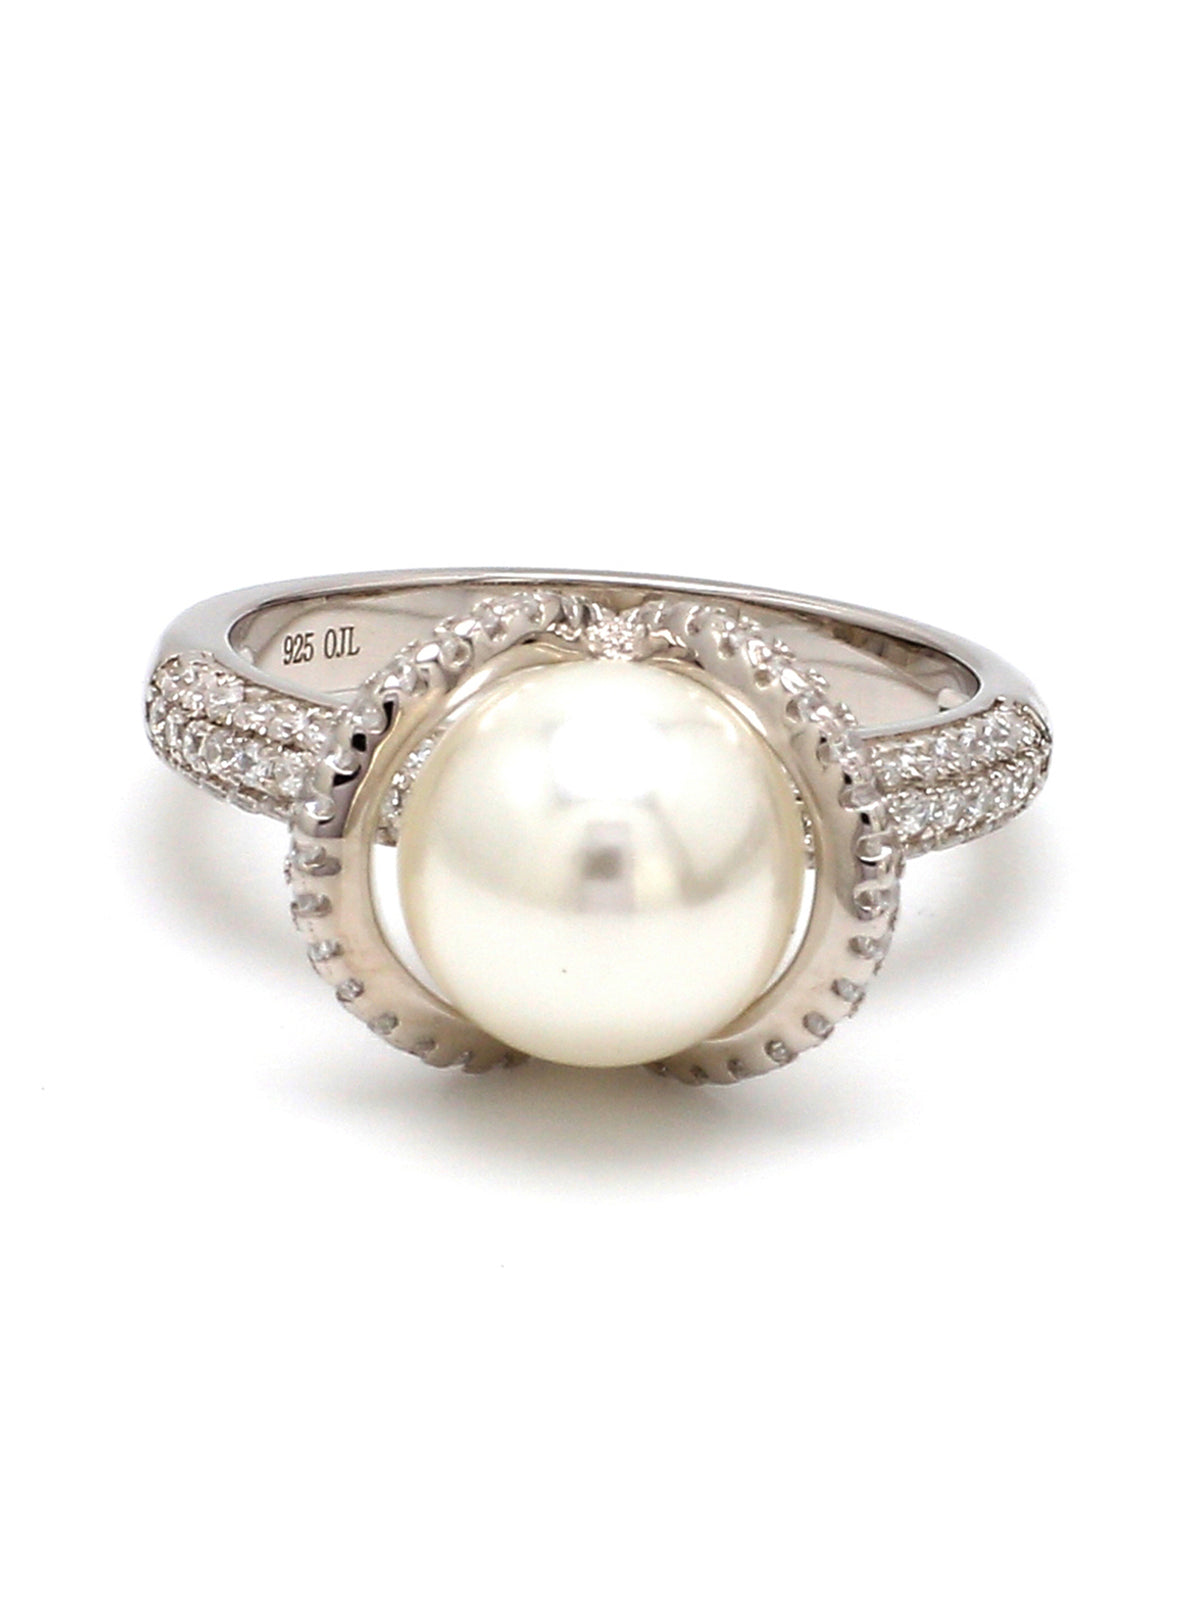 REAL PEARL ORNATE STATEMENT RING